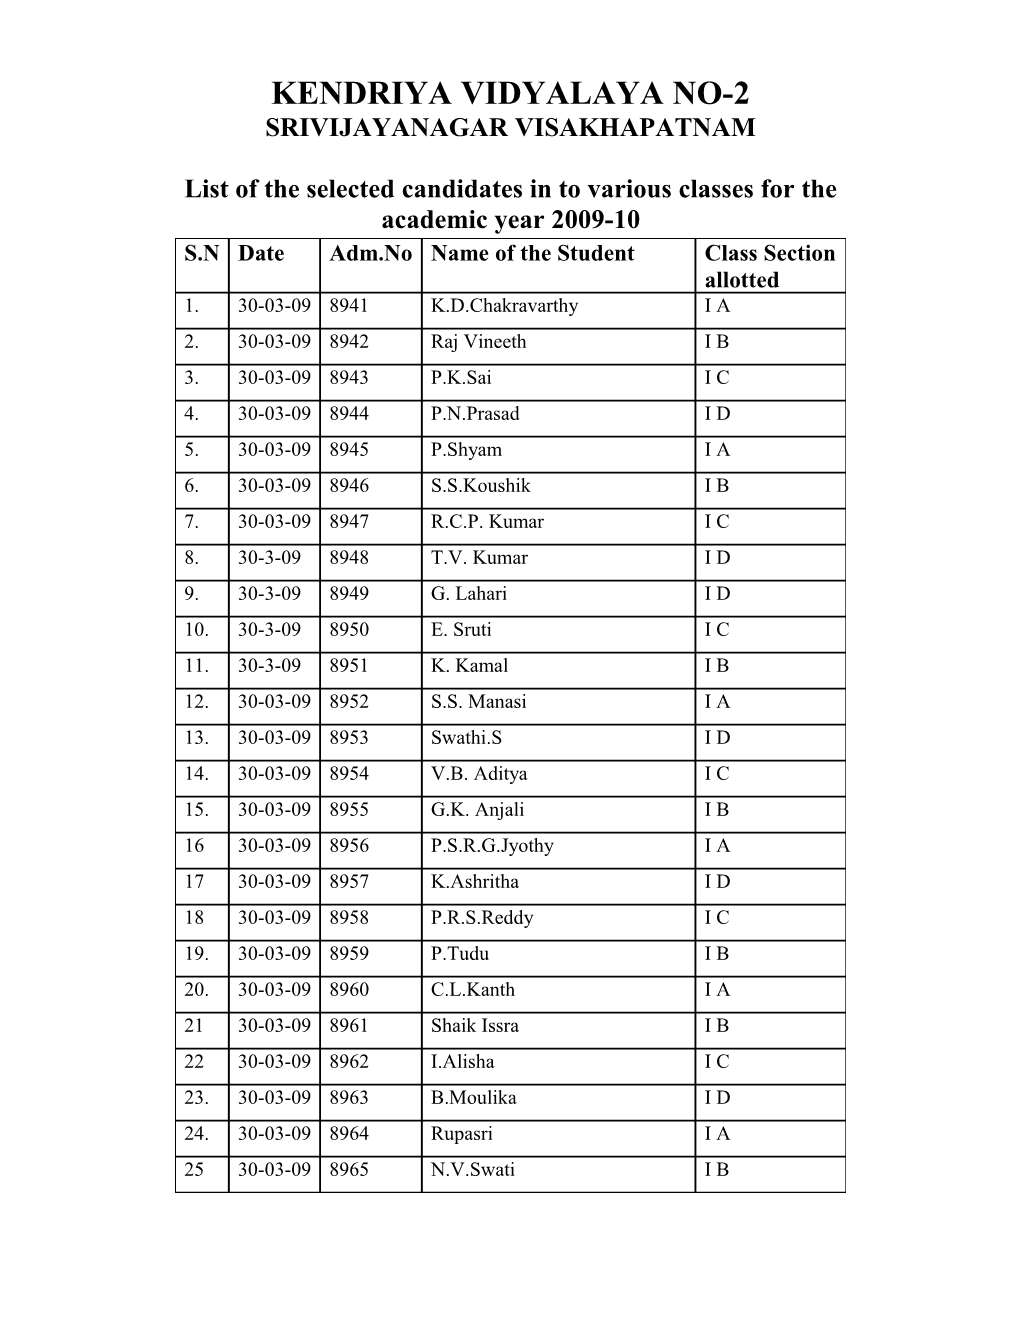 List of the Selected Candidates in to Various Classes for the Academic Year 2009-10